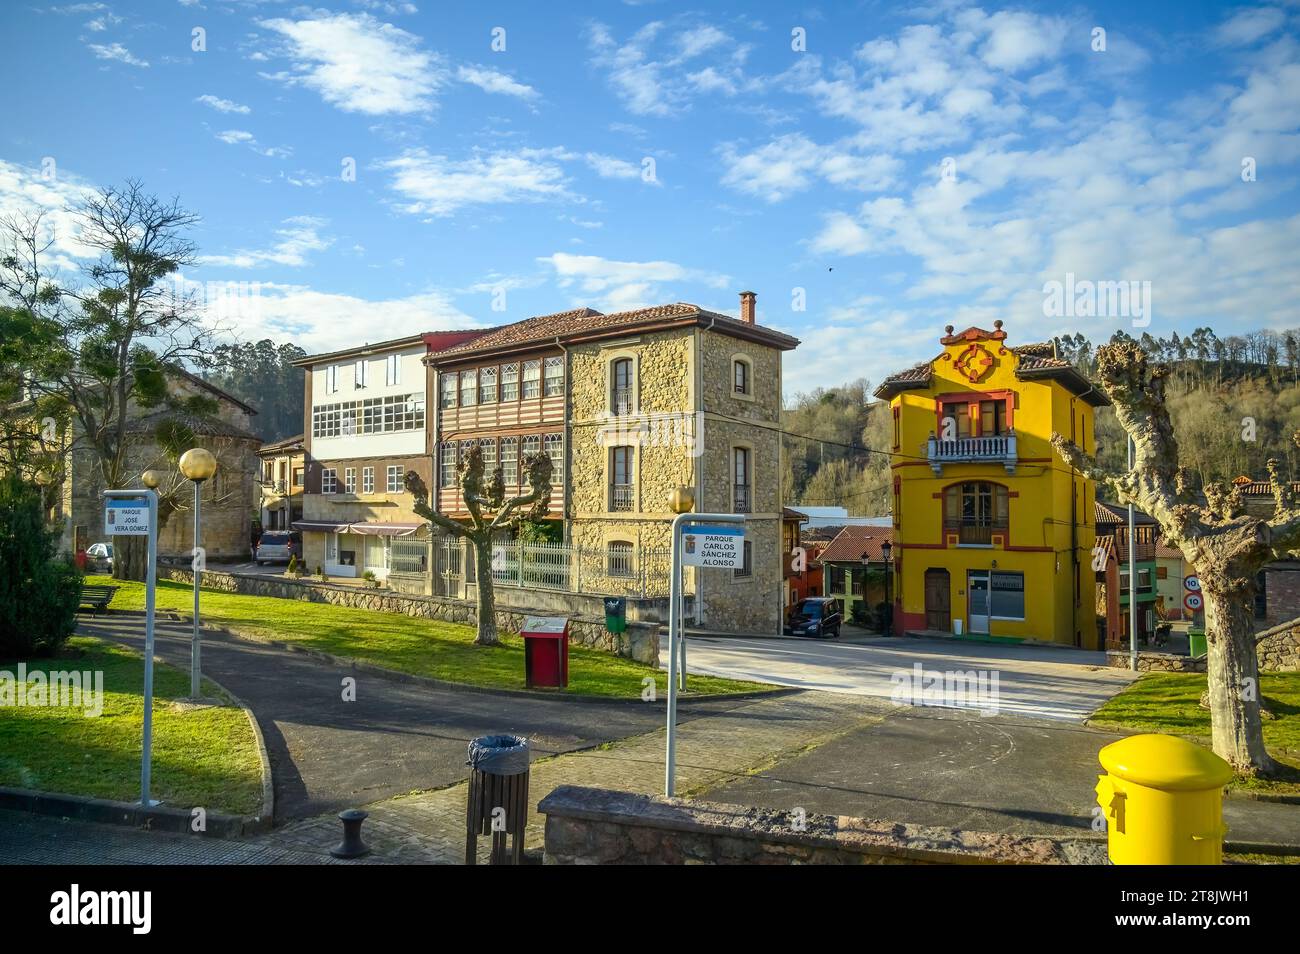 OVIEDO, ASTURIAS, SPAIN, residential buildings in a small rural town or village Stock Photo